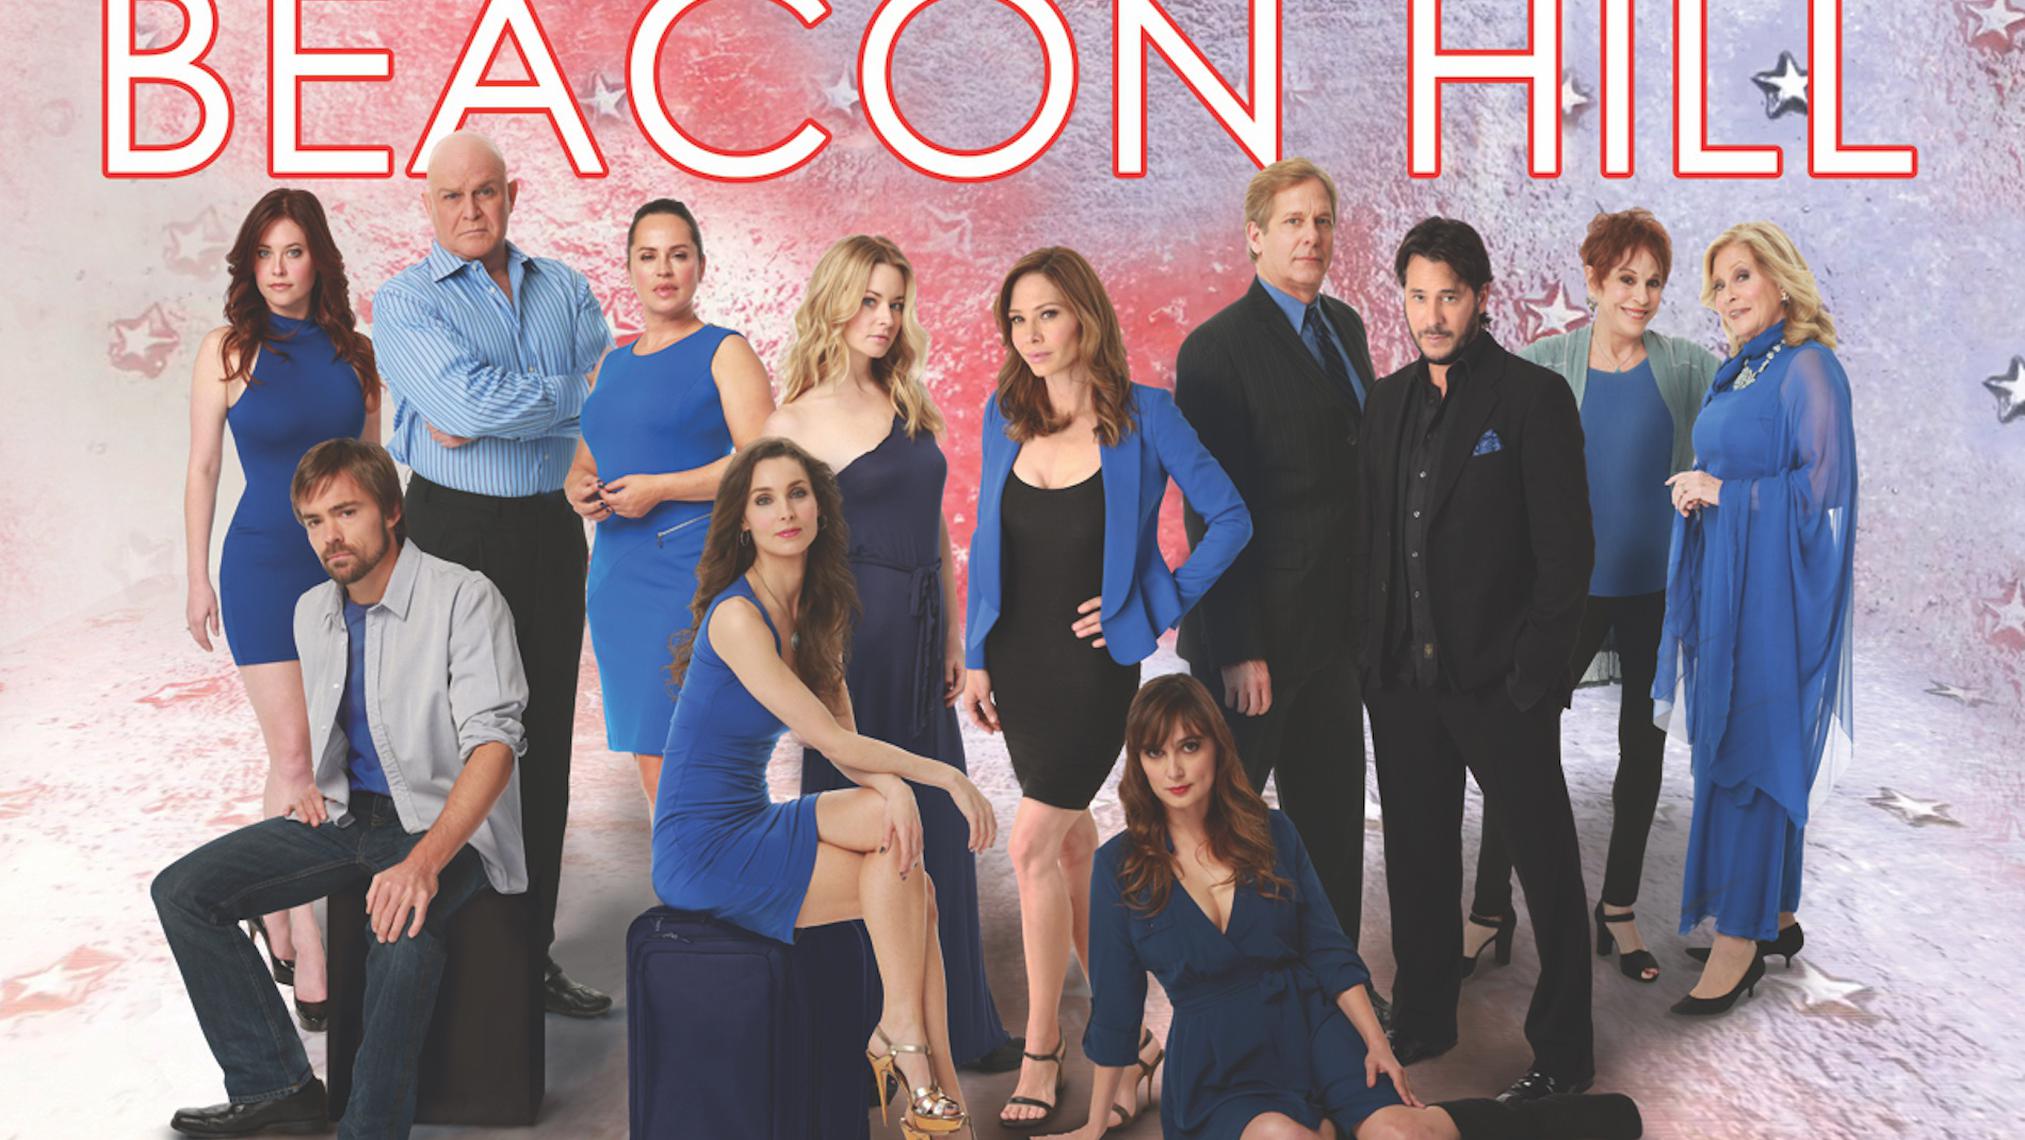 Soap Stars Tape 'Beacon Hill The Series' Season 2 Filled With Drama News